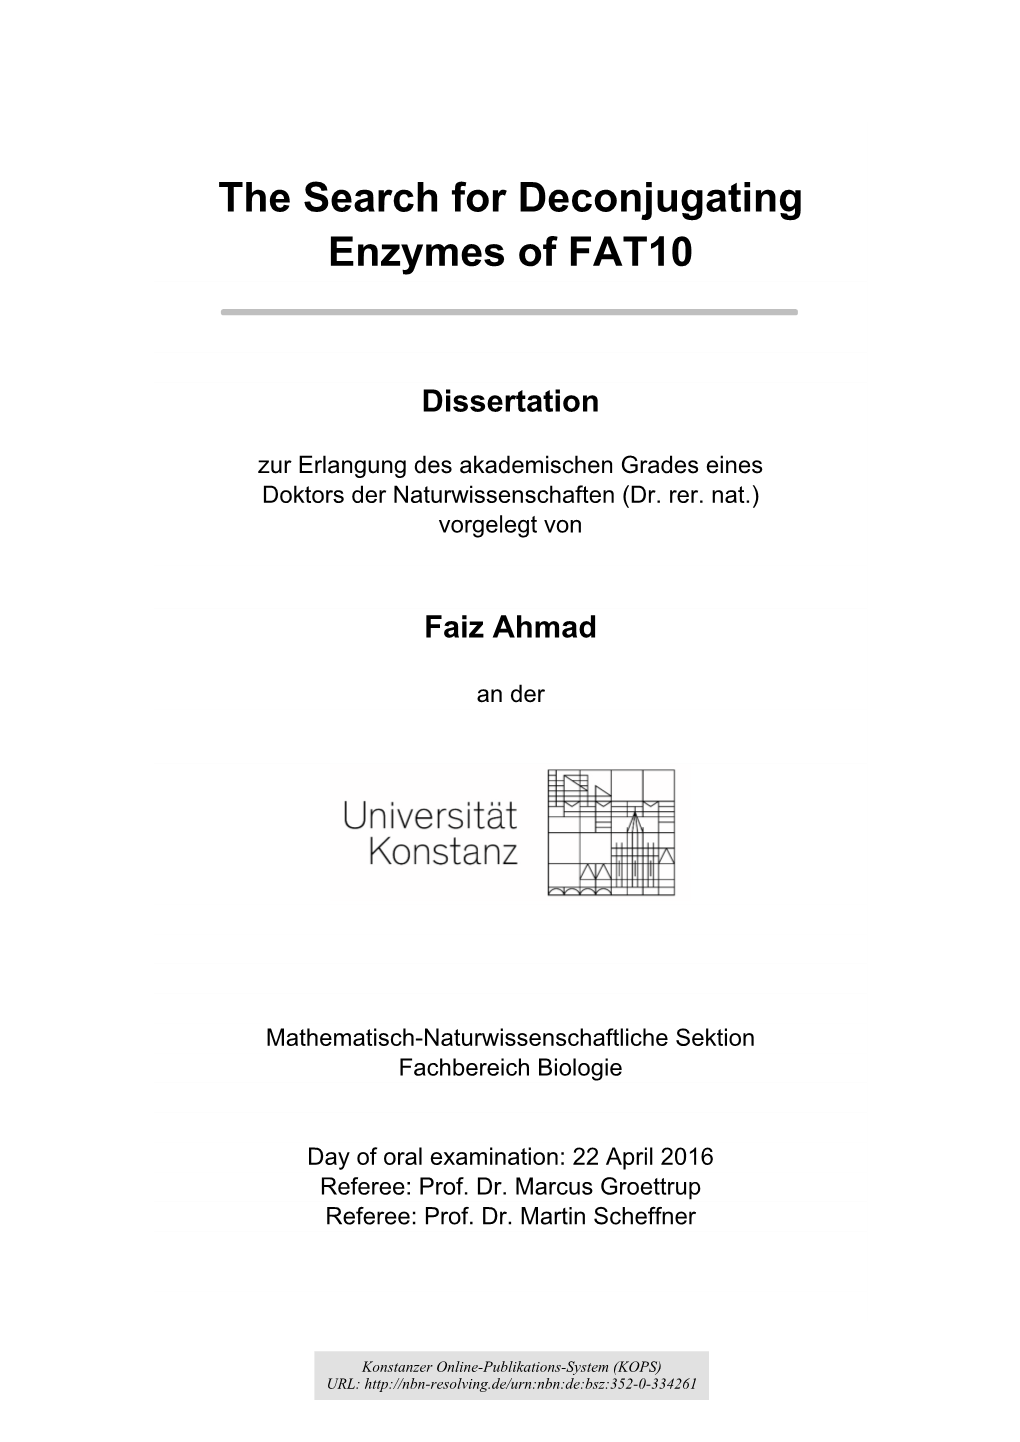 The Search for Deconjugating Enzymes of FAT10